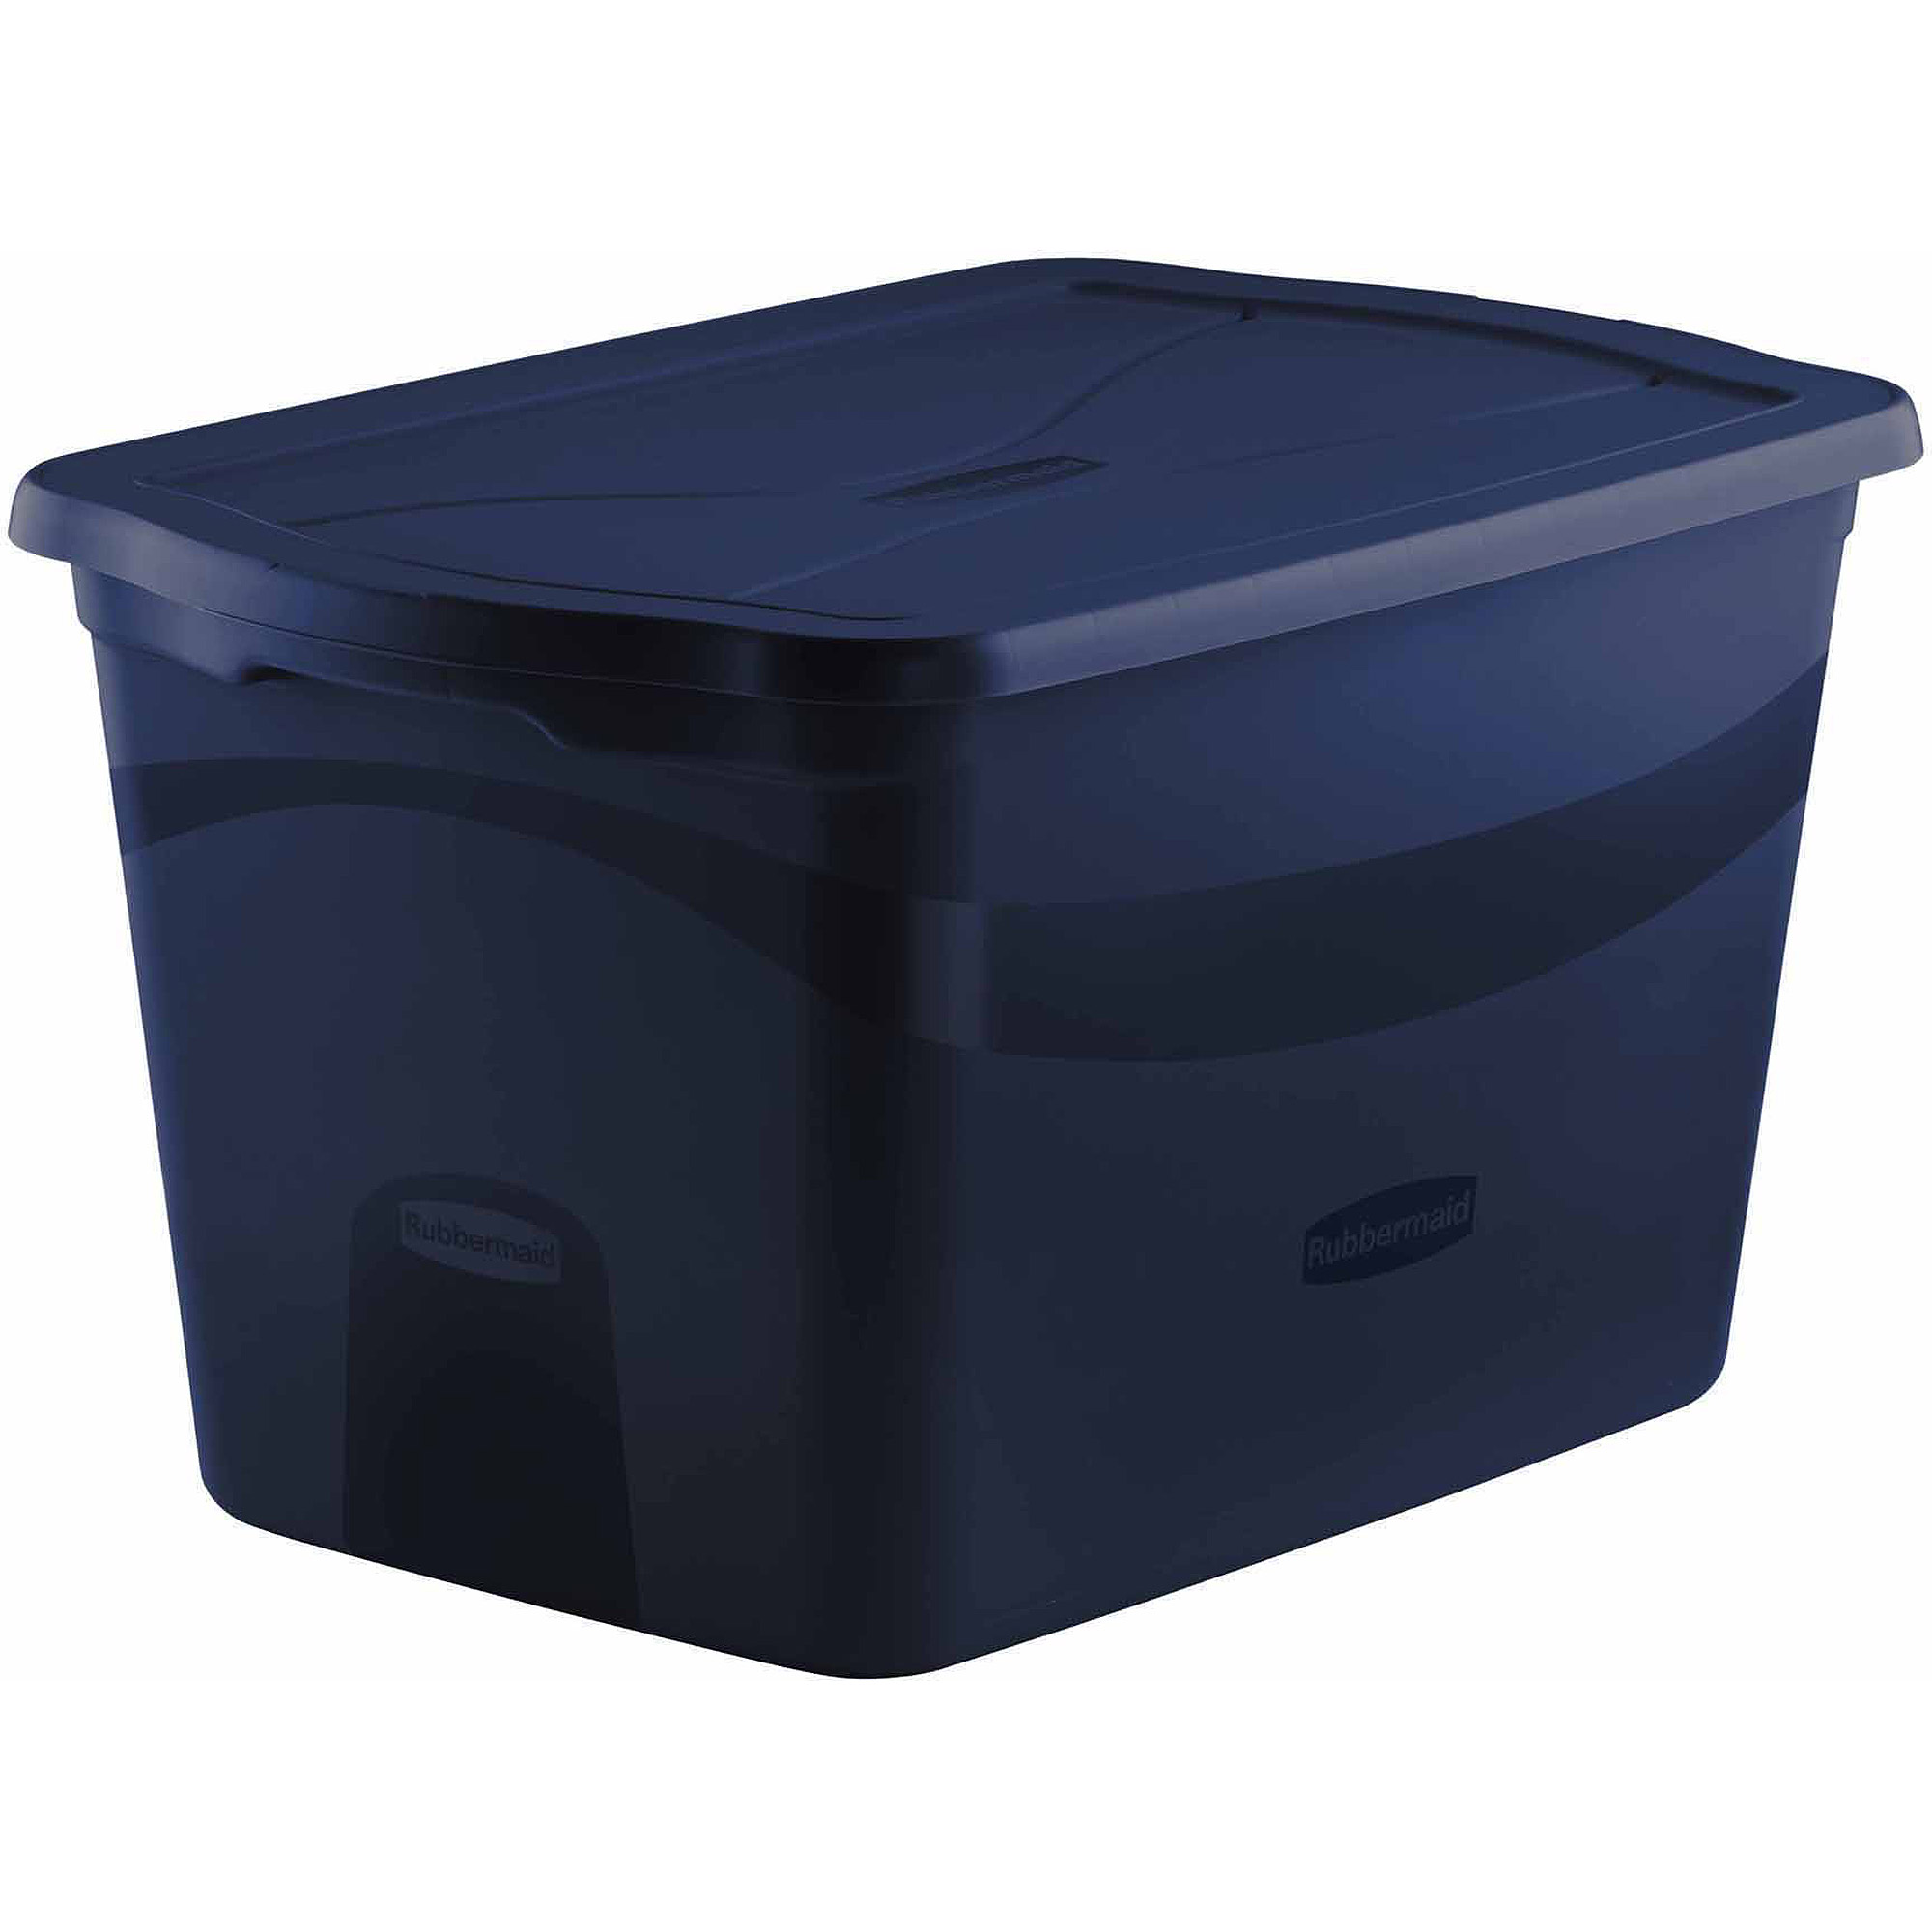 Rubbermaid Cleverstore 29 Gallon Tote Bl - image 1 of 1